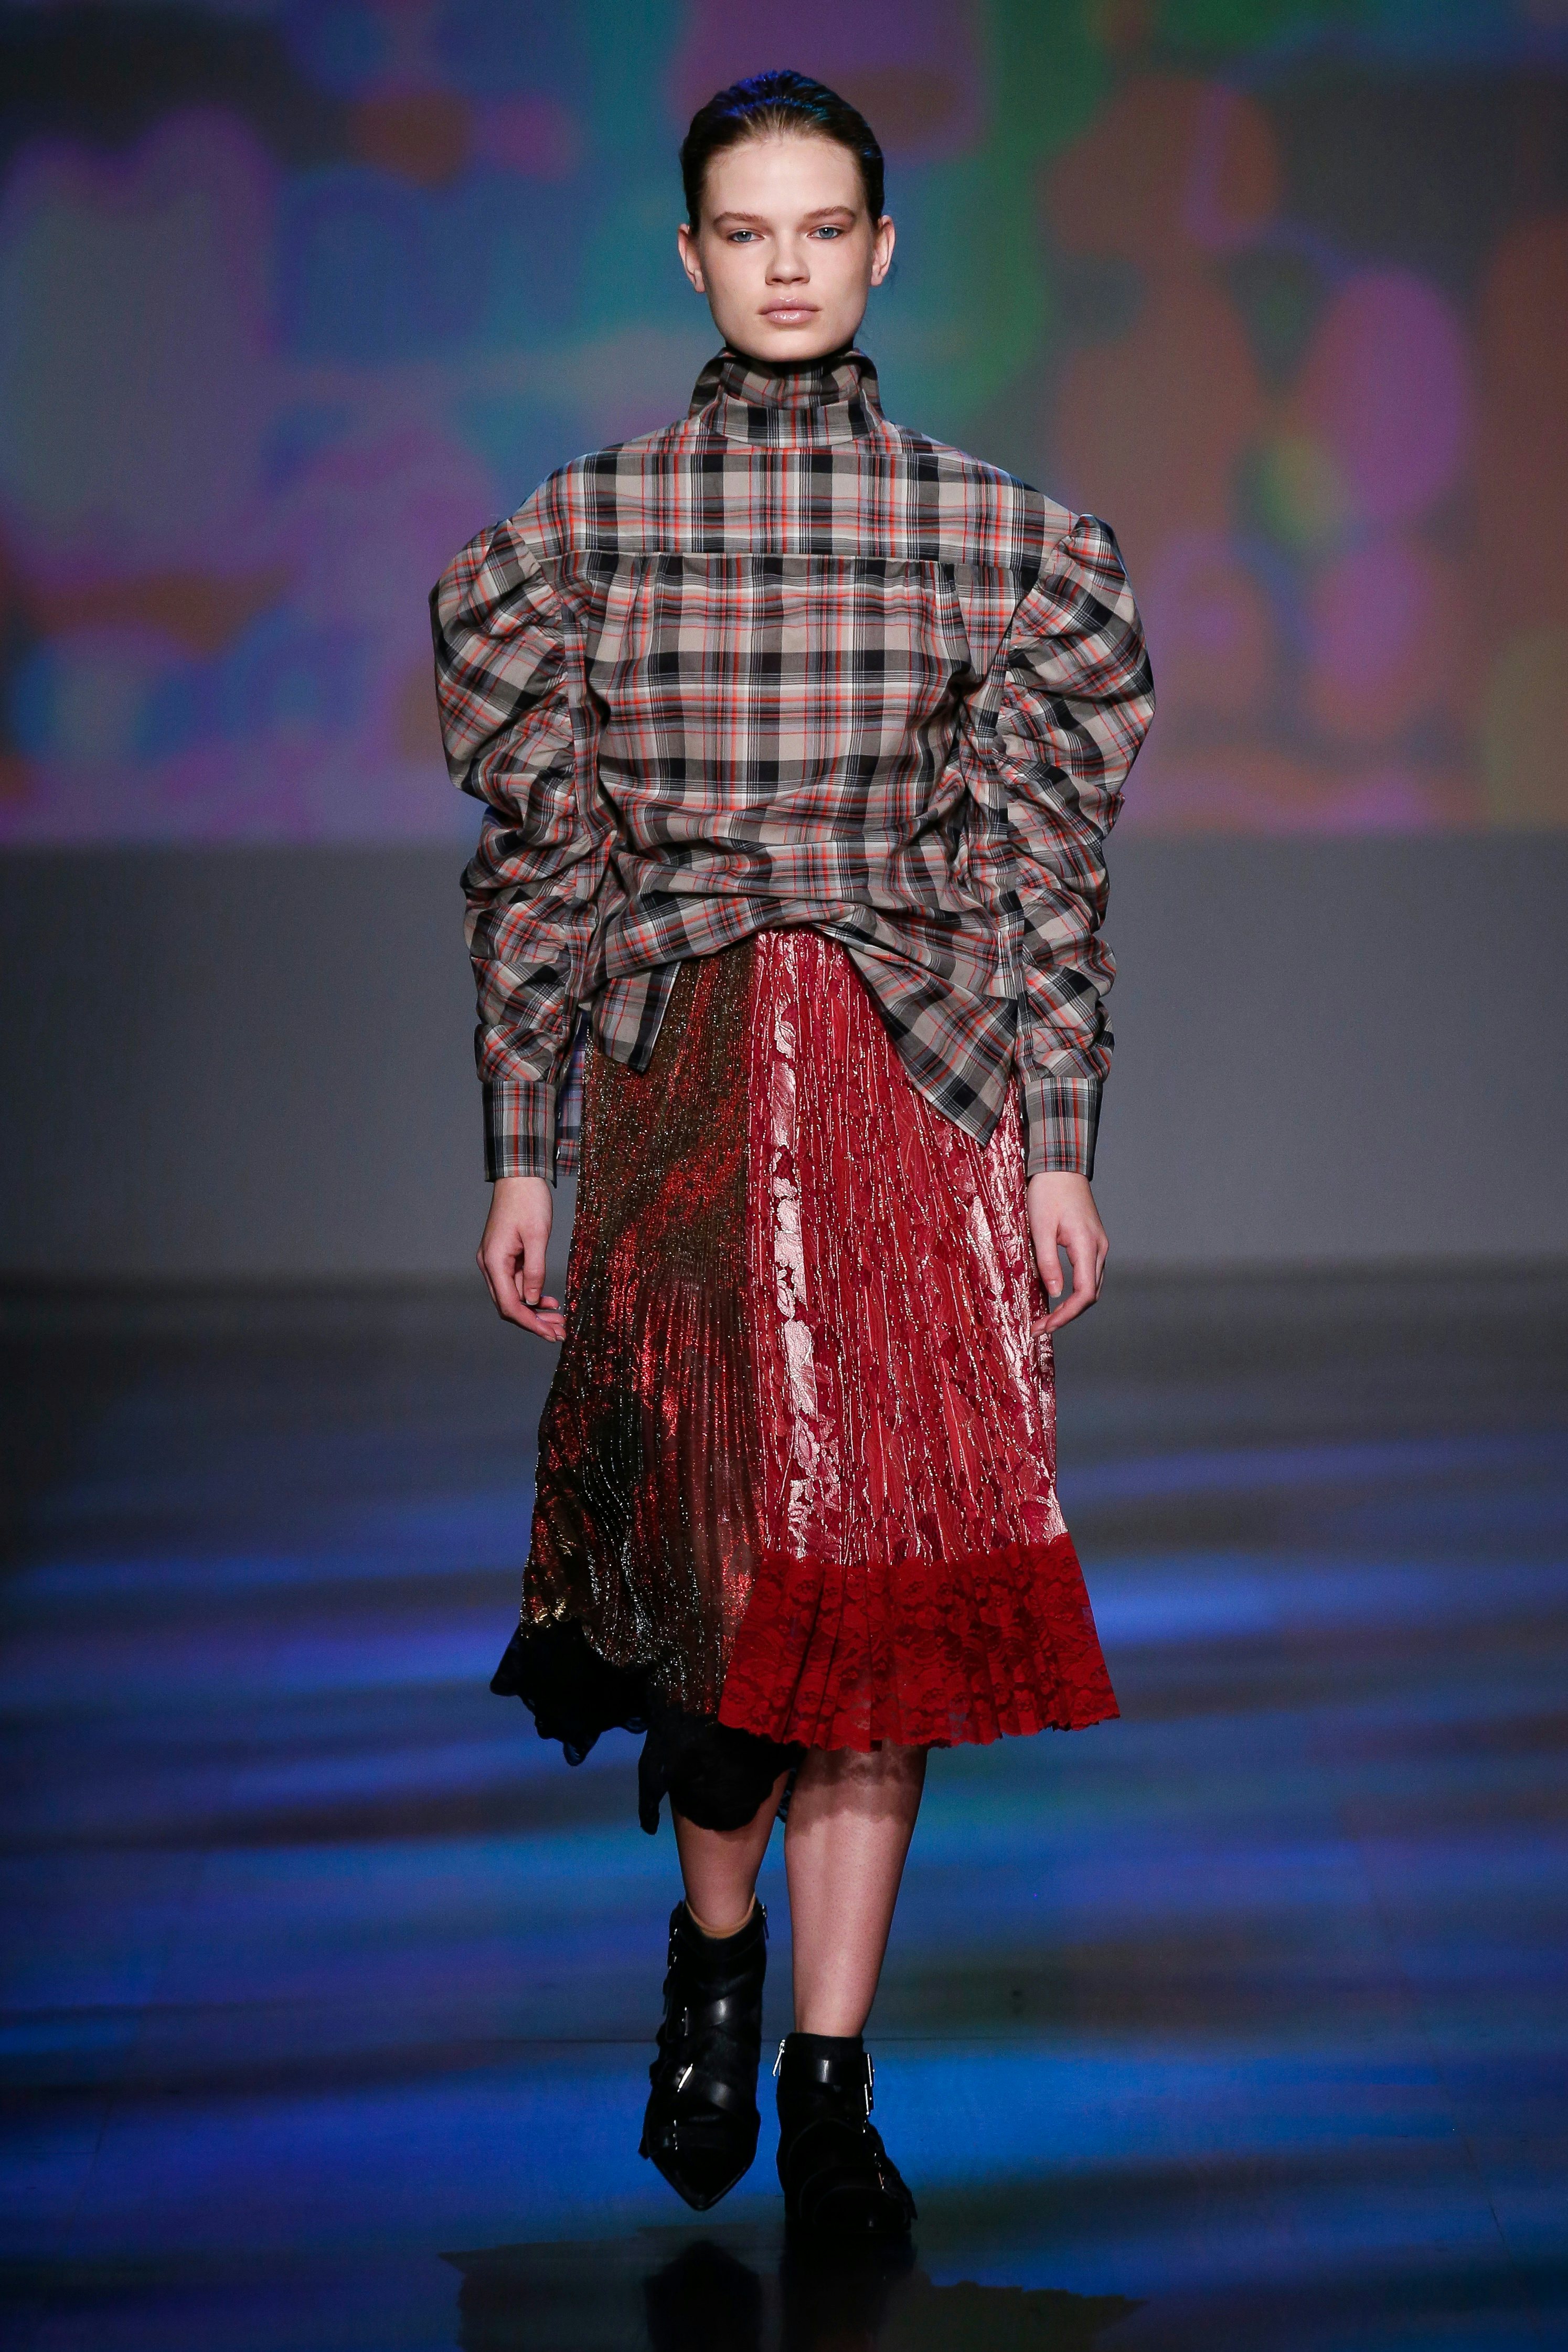 A look for the Vivienne Tam collection during the New York Fashion Week. (Photo by Dan Lecca)